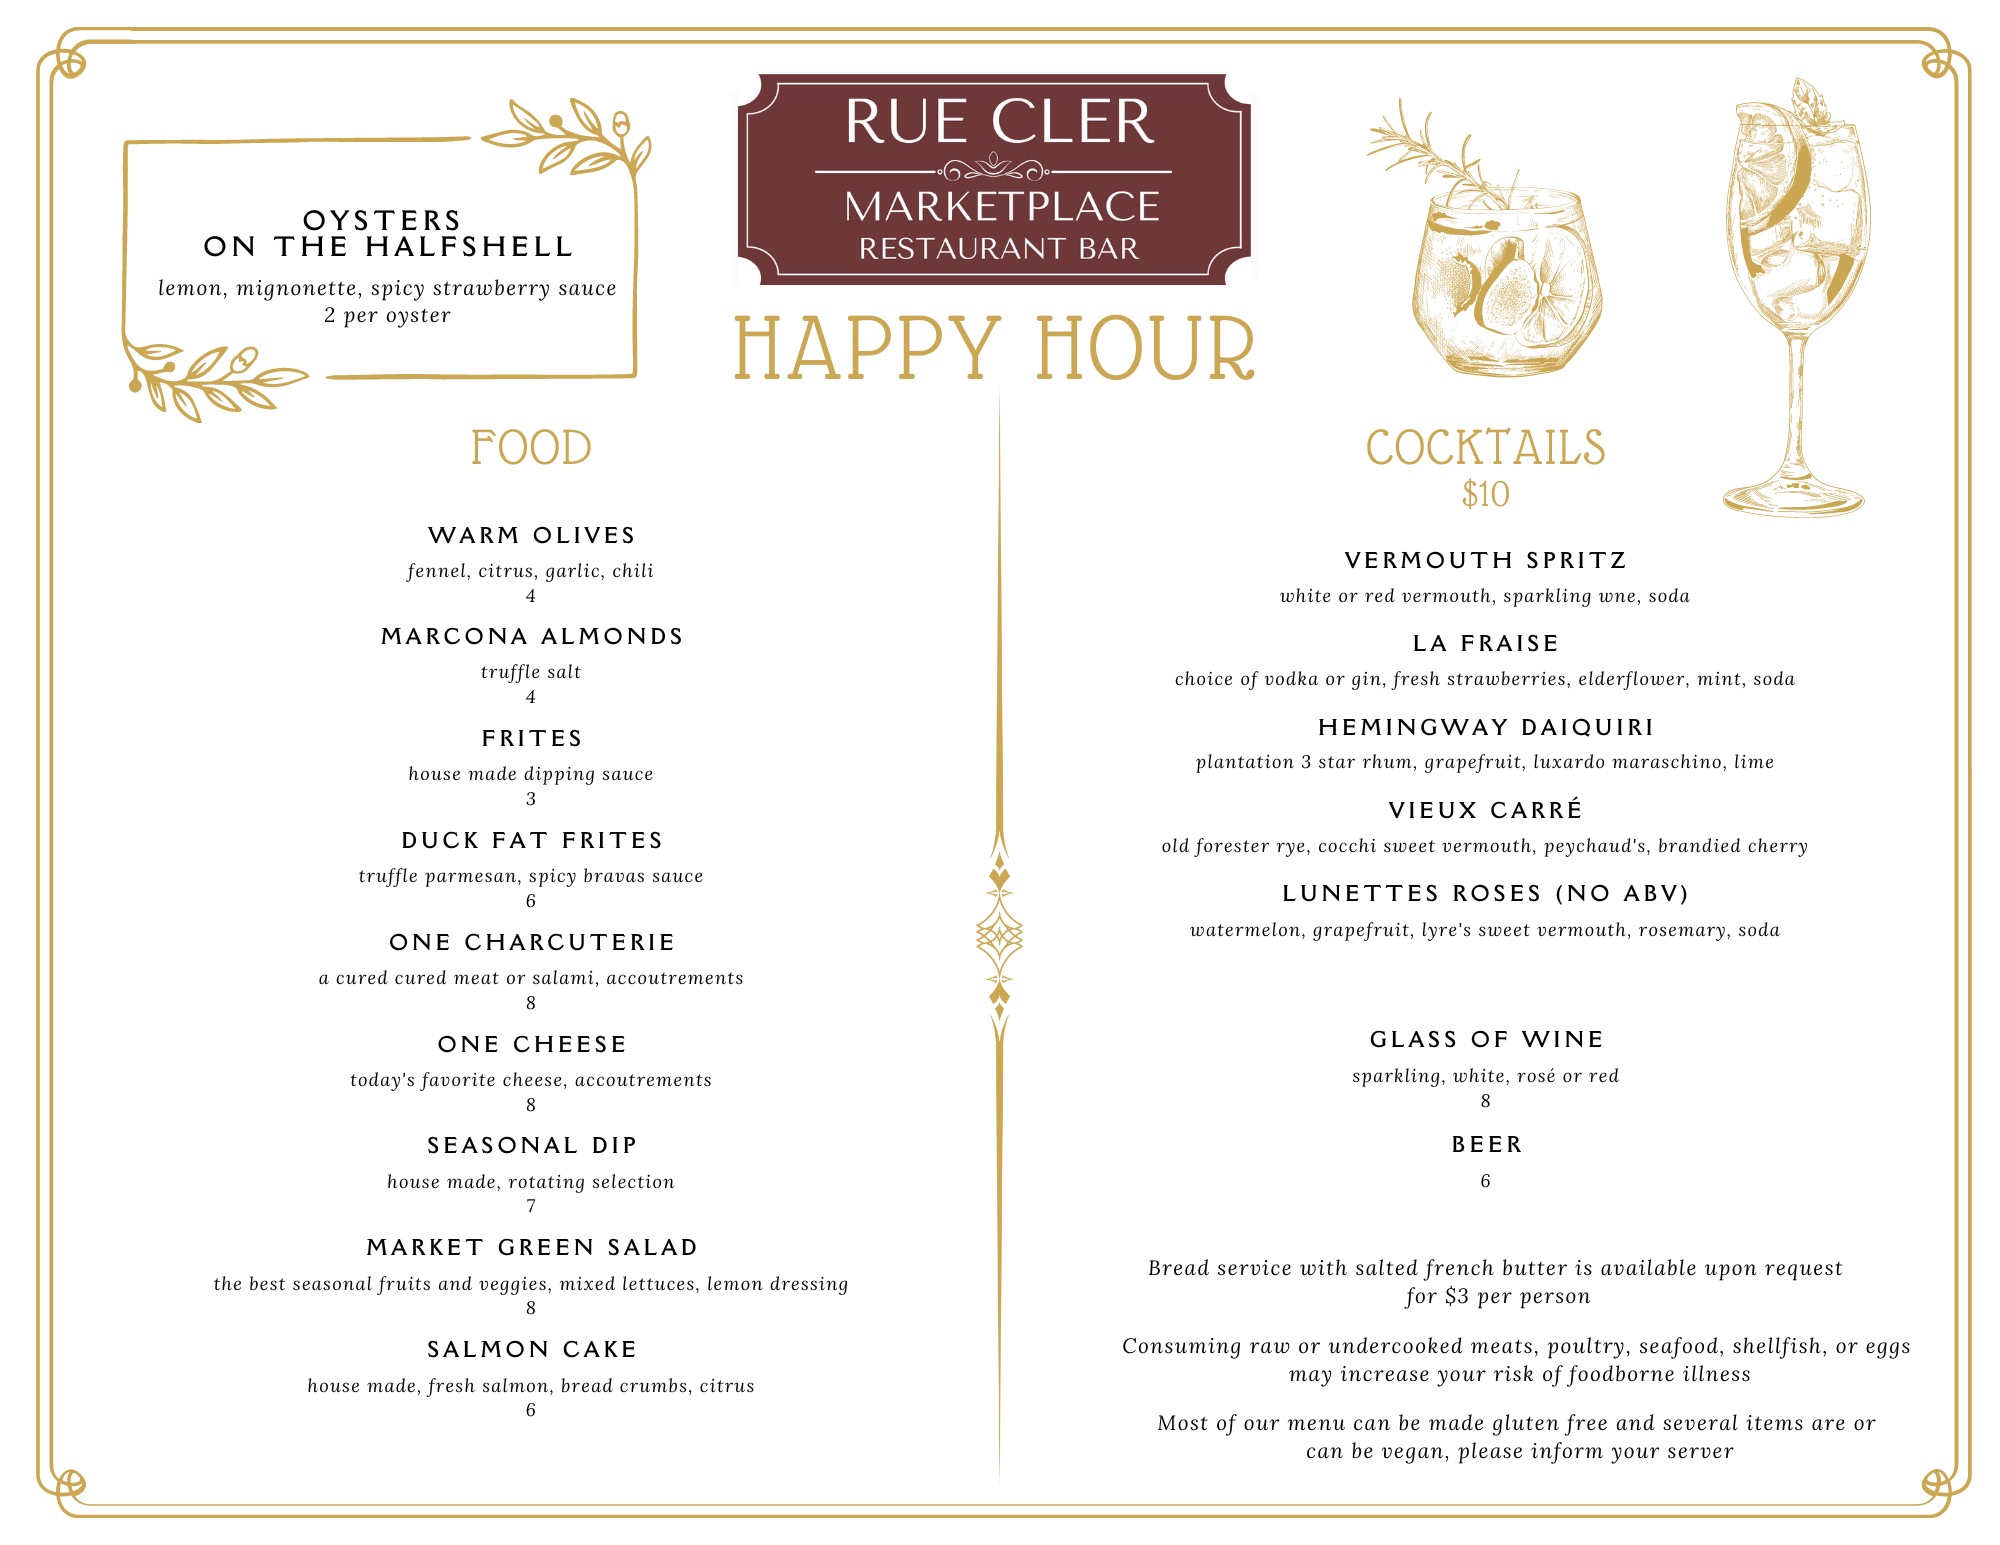 Latest Happy Hour Menu for Rue Cler Marketplace